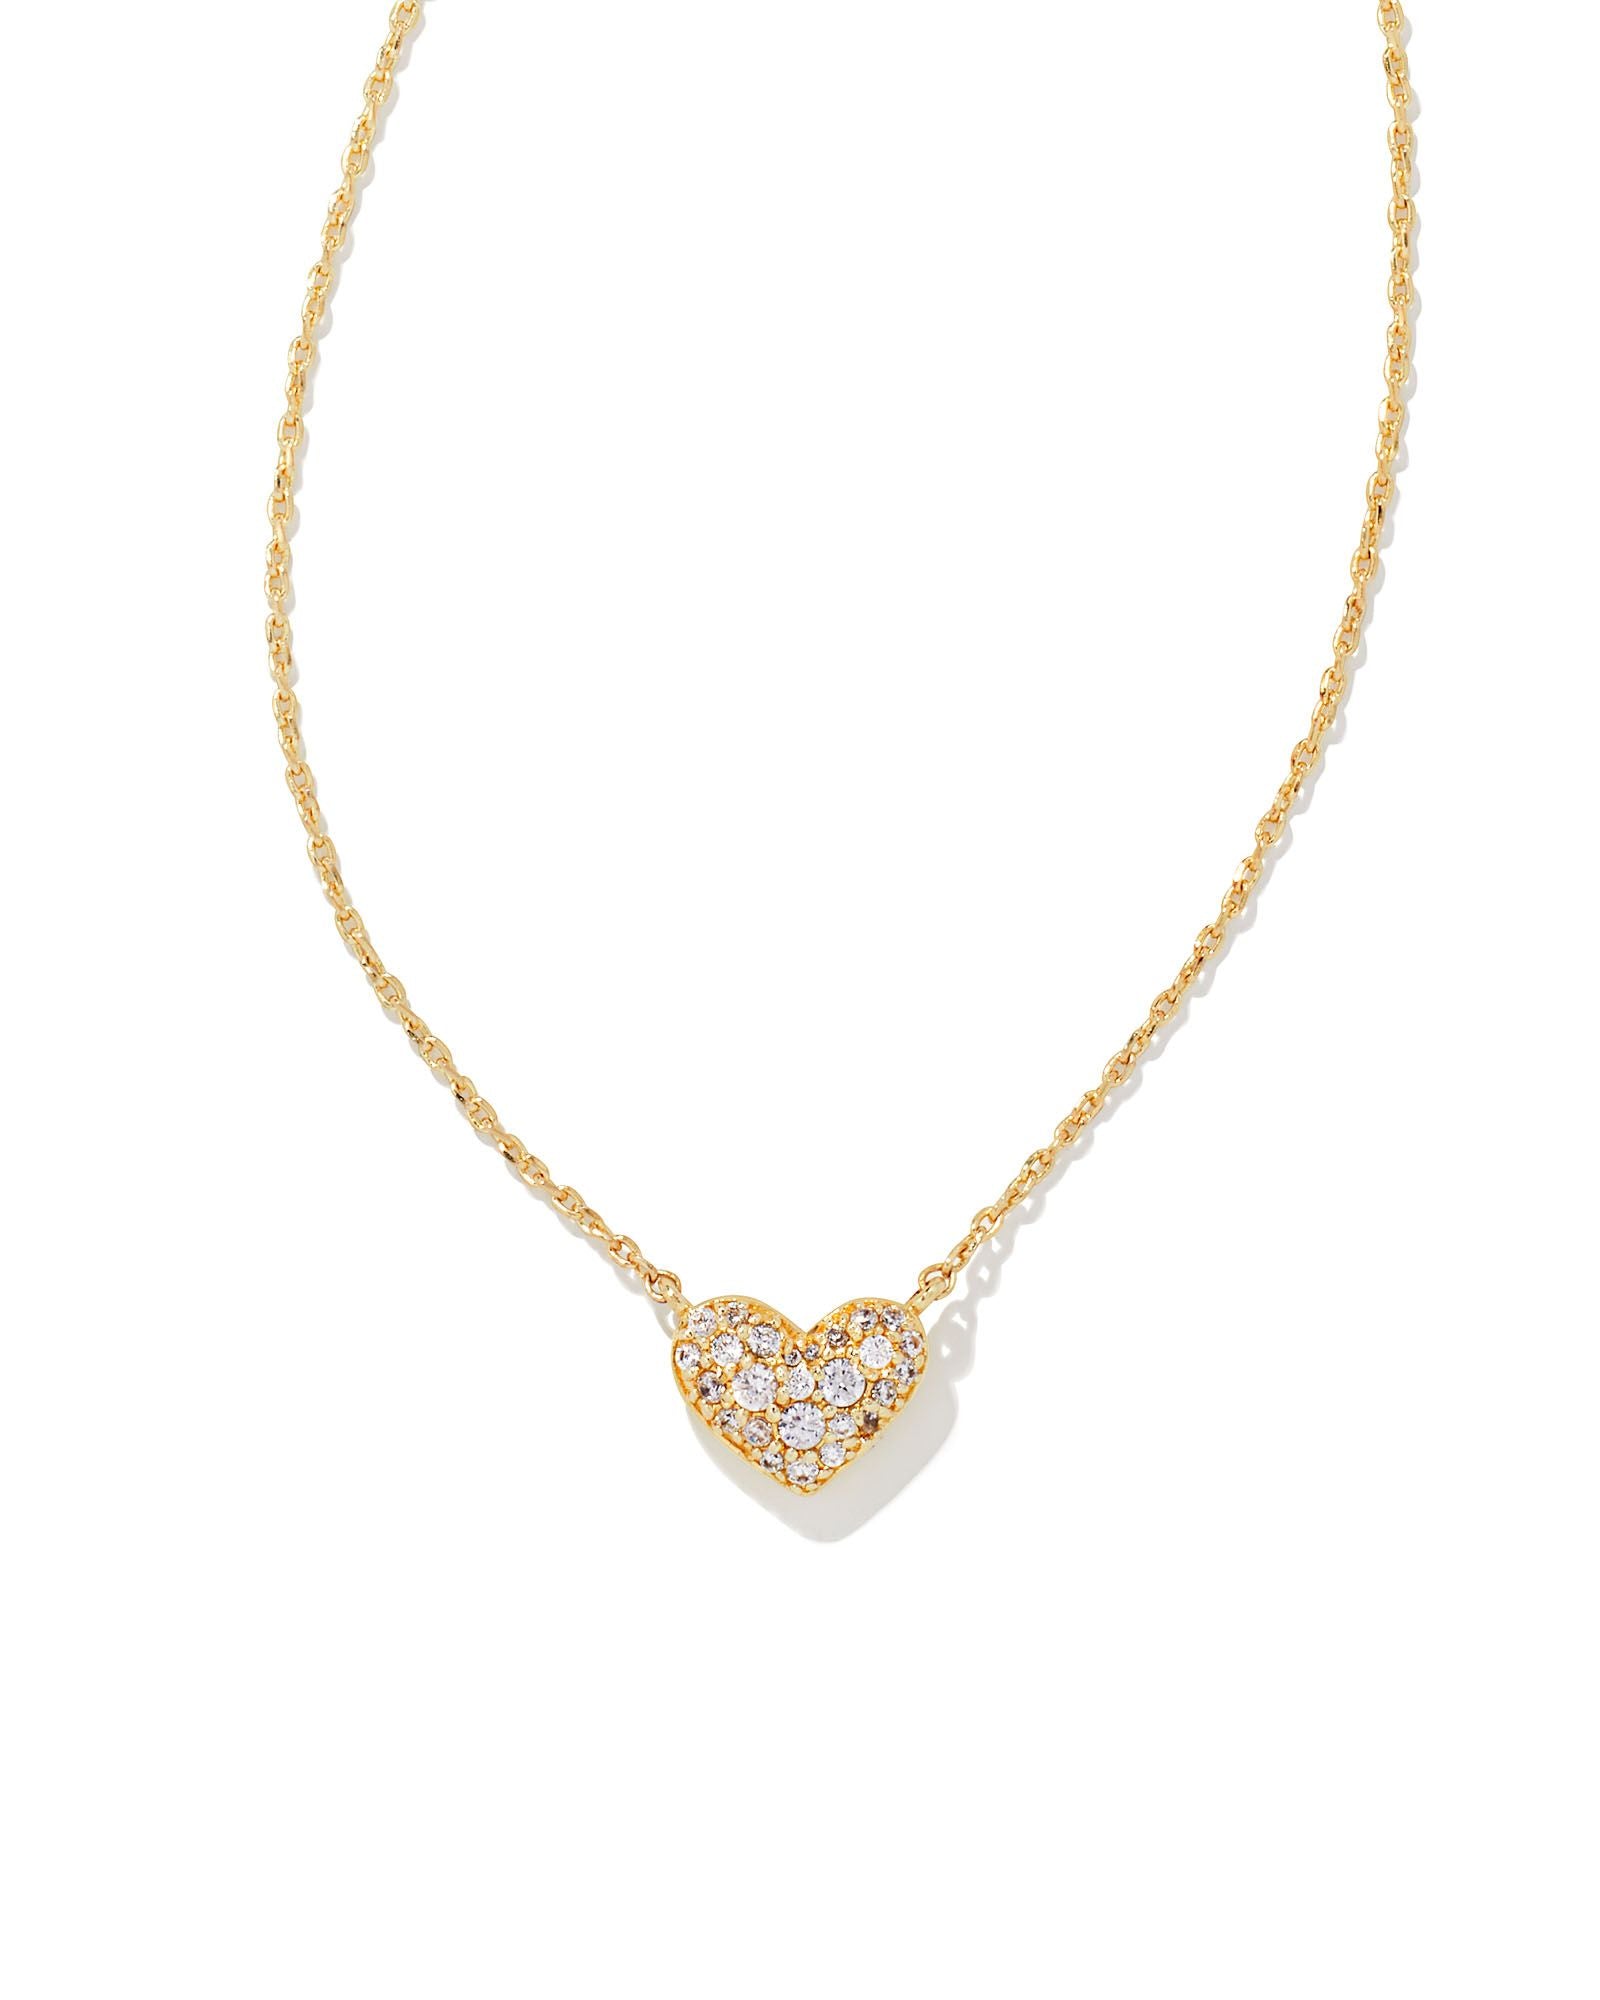 Ari Pave Crystal Heart Necklace in Gold and CZ